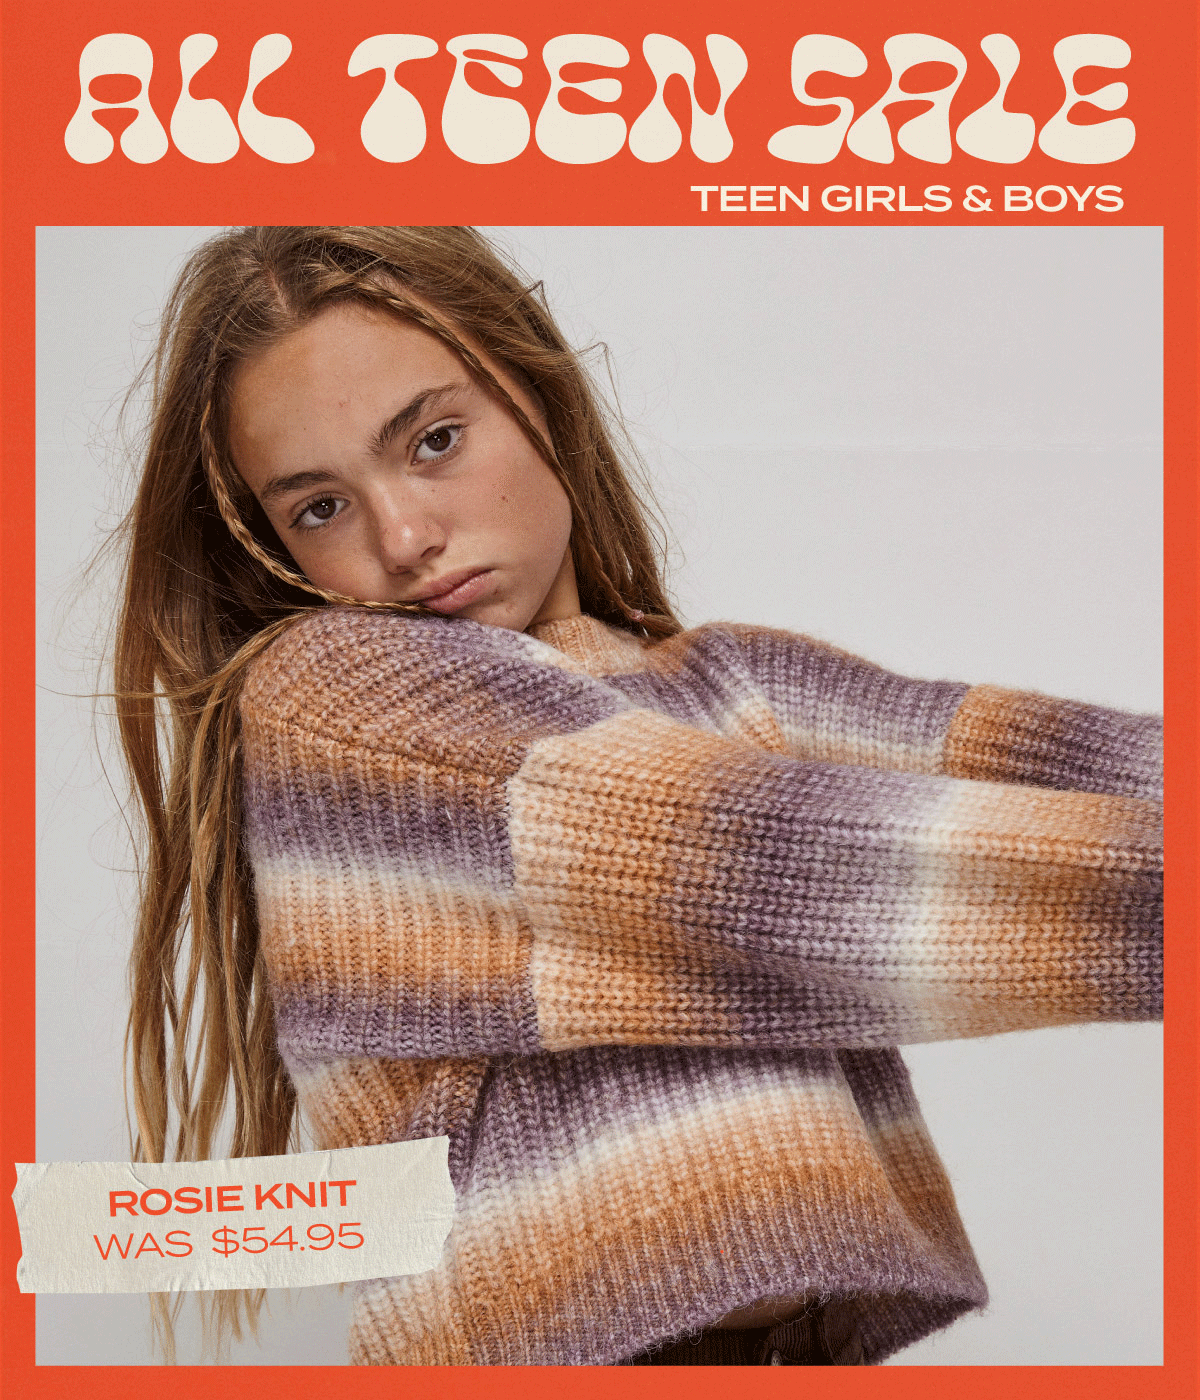 Image with red border, text at the top 'All Teen Sale'. Image features teen girl wearing the Rosie knit